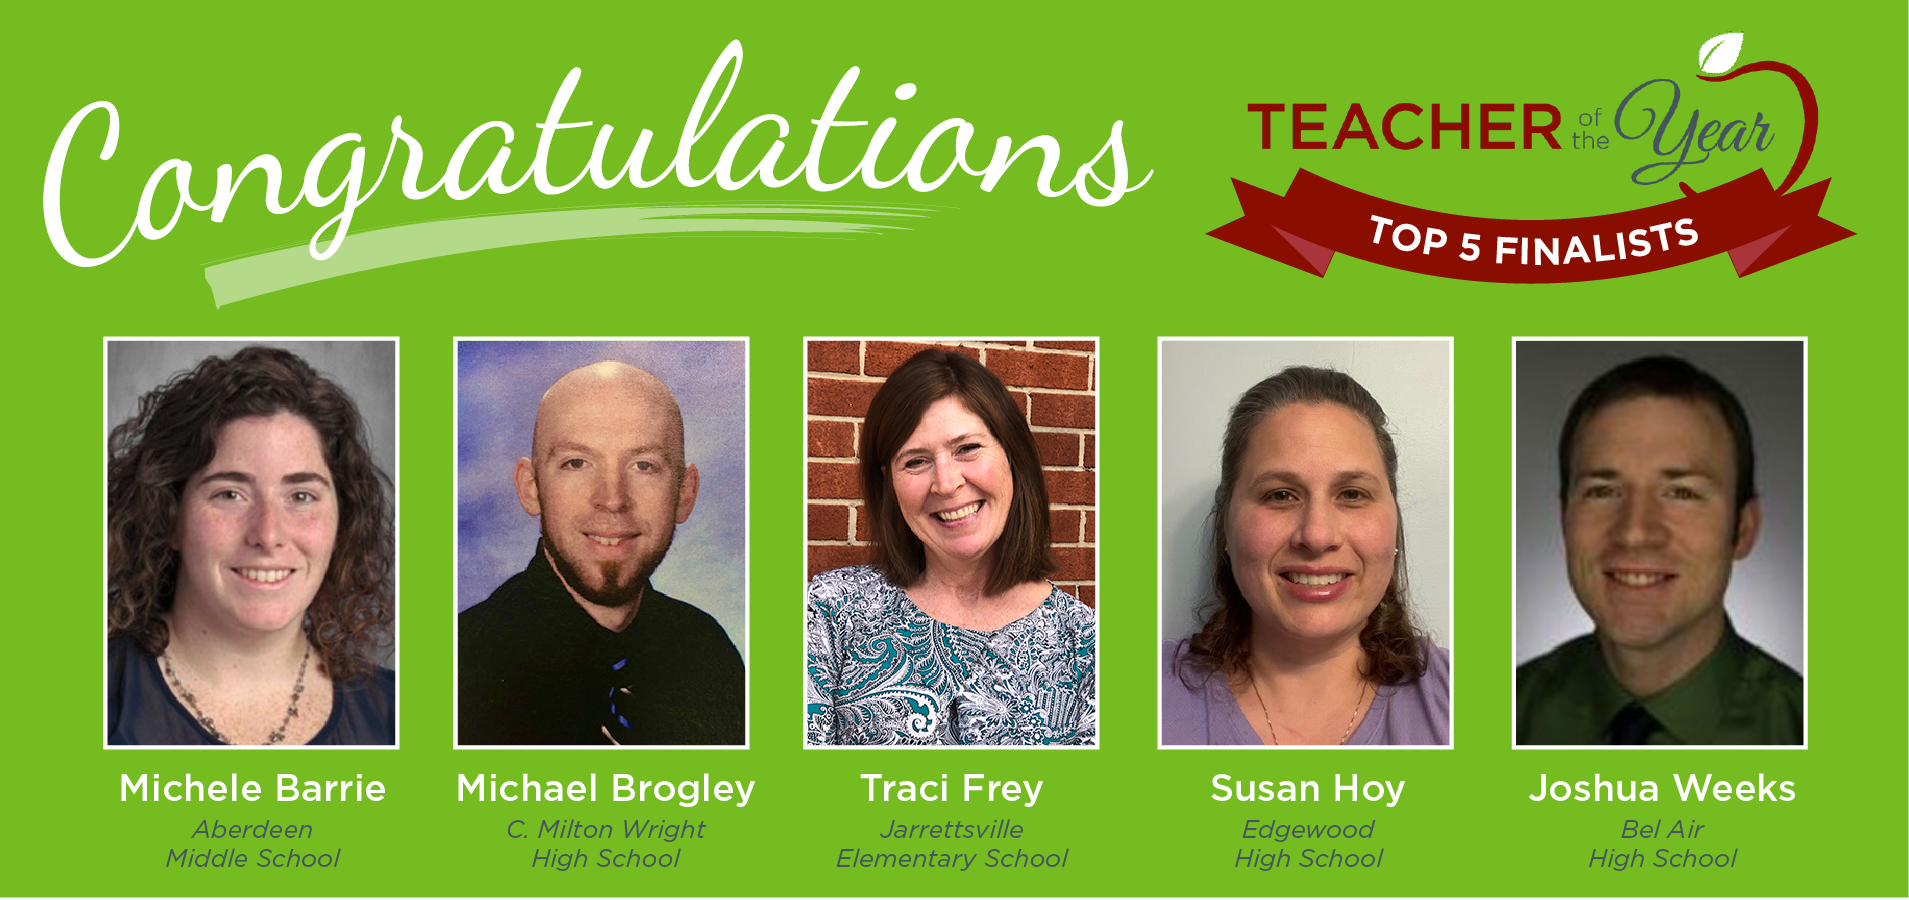 Teacher of the Year Finalists